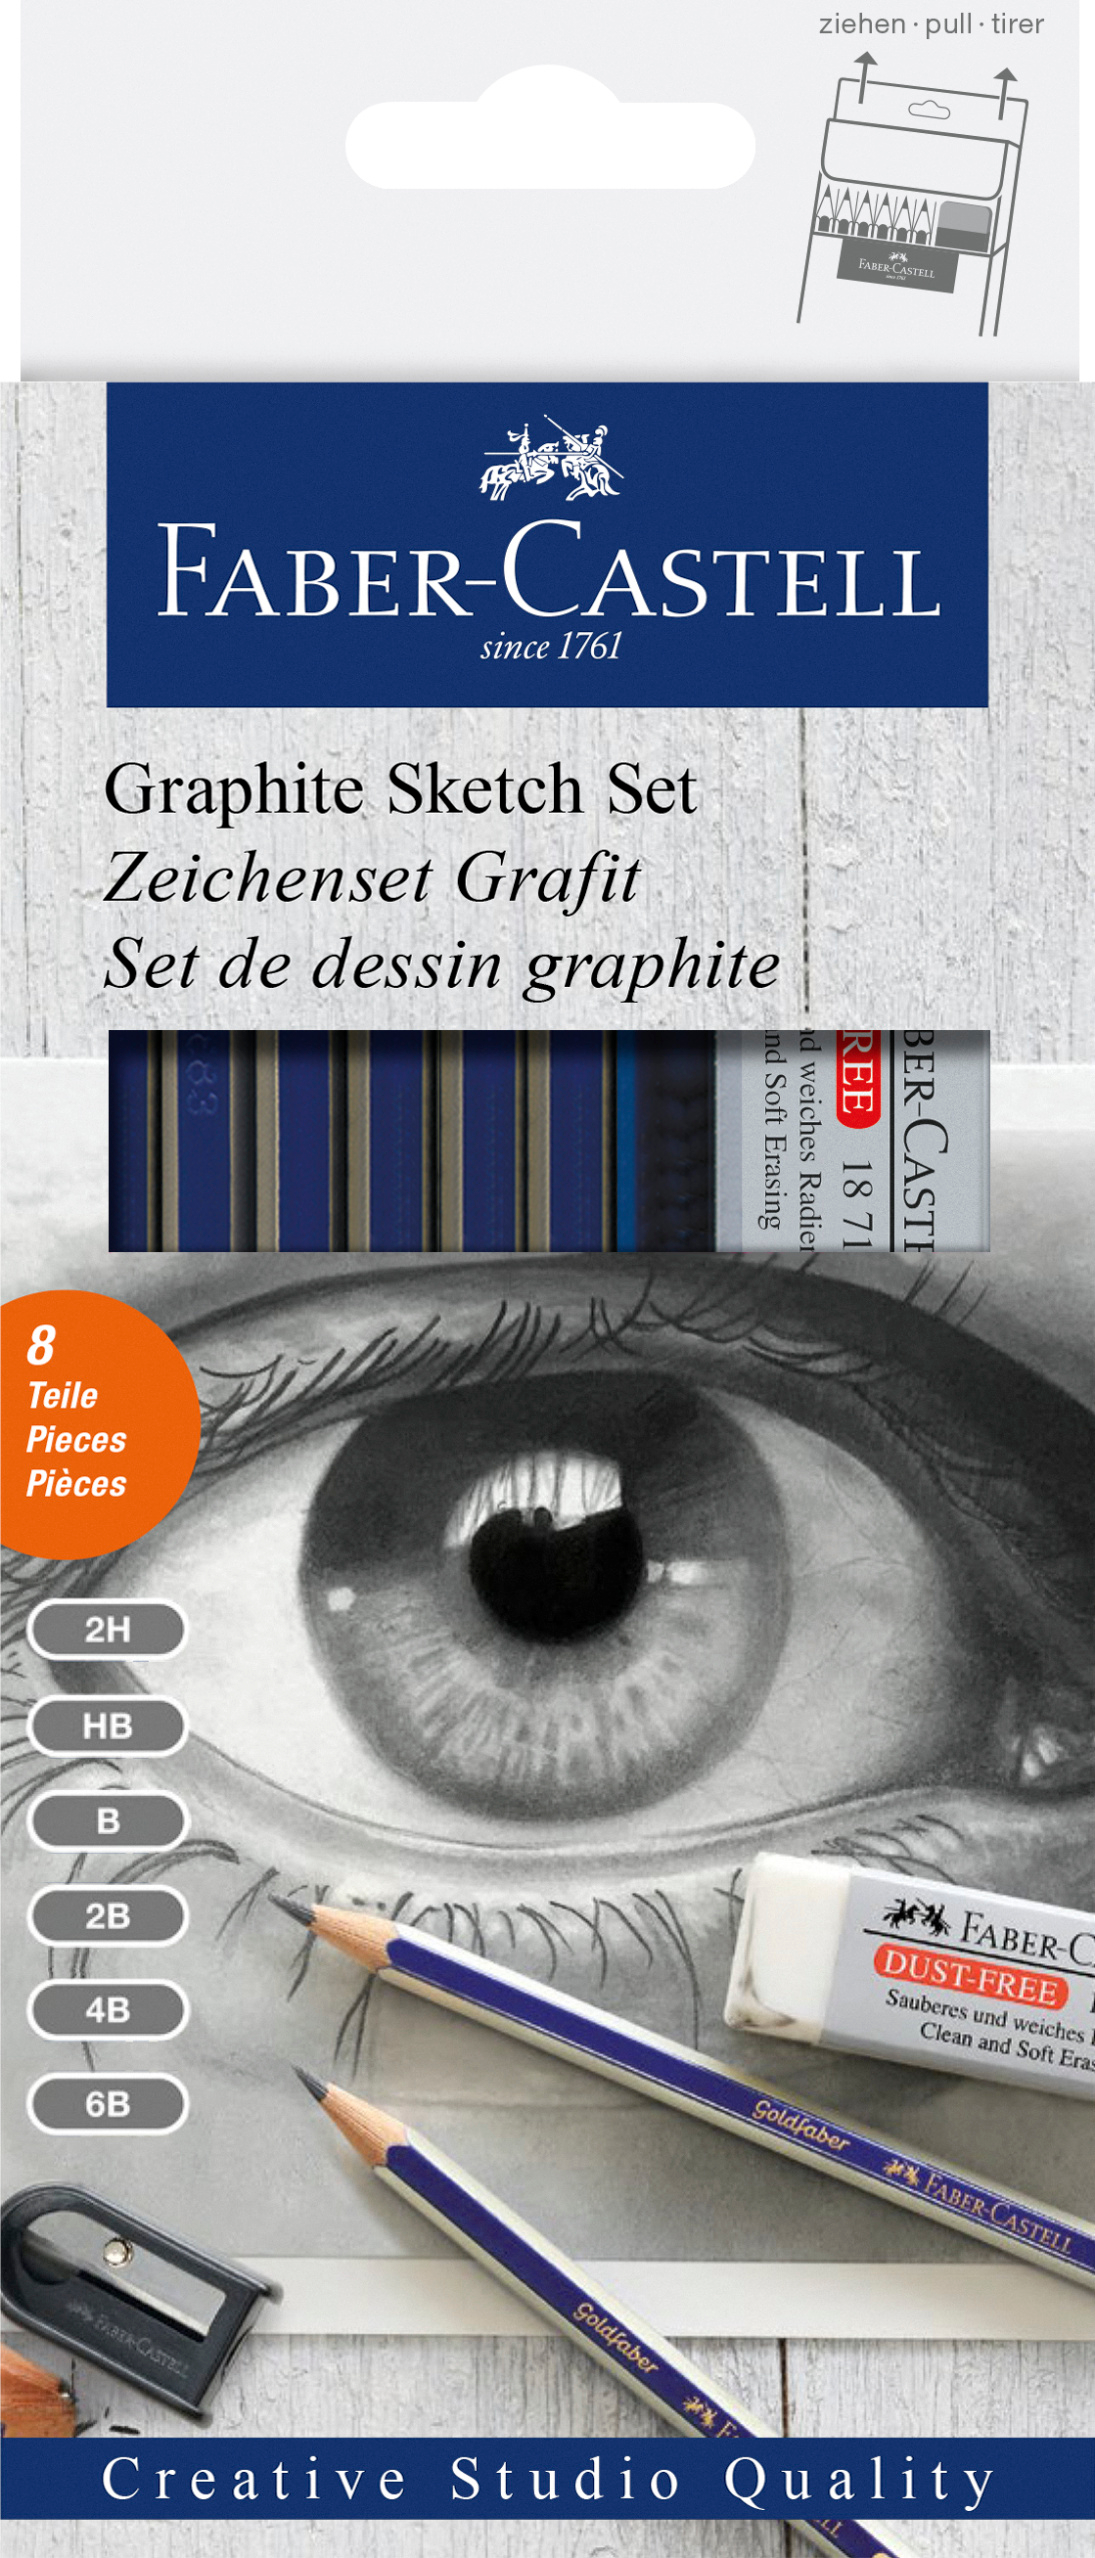 FABER-CASTELL Goldfaber Set crayon graphit 114000 crayon, gomme/Taille-crayon